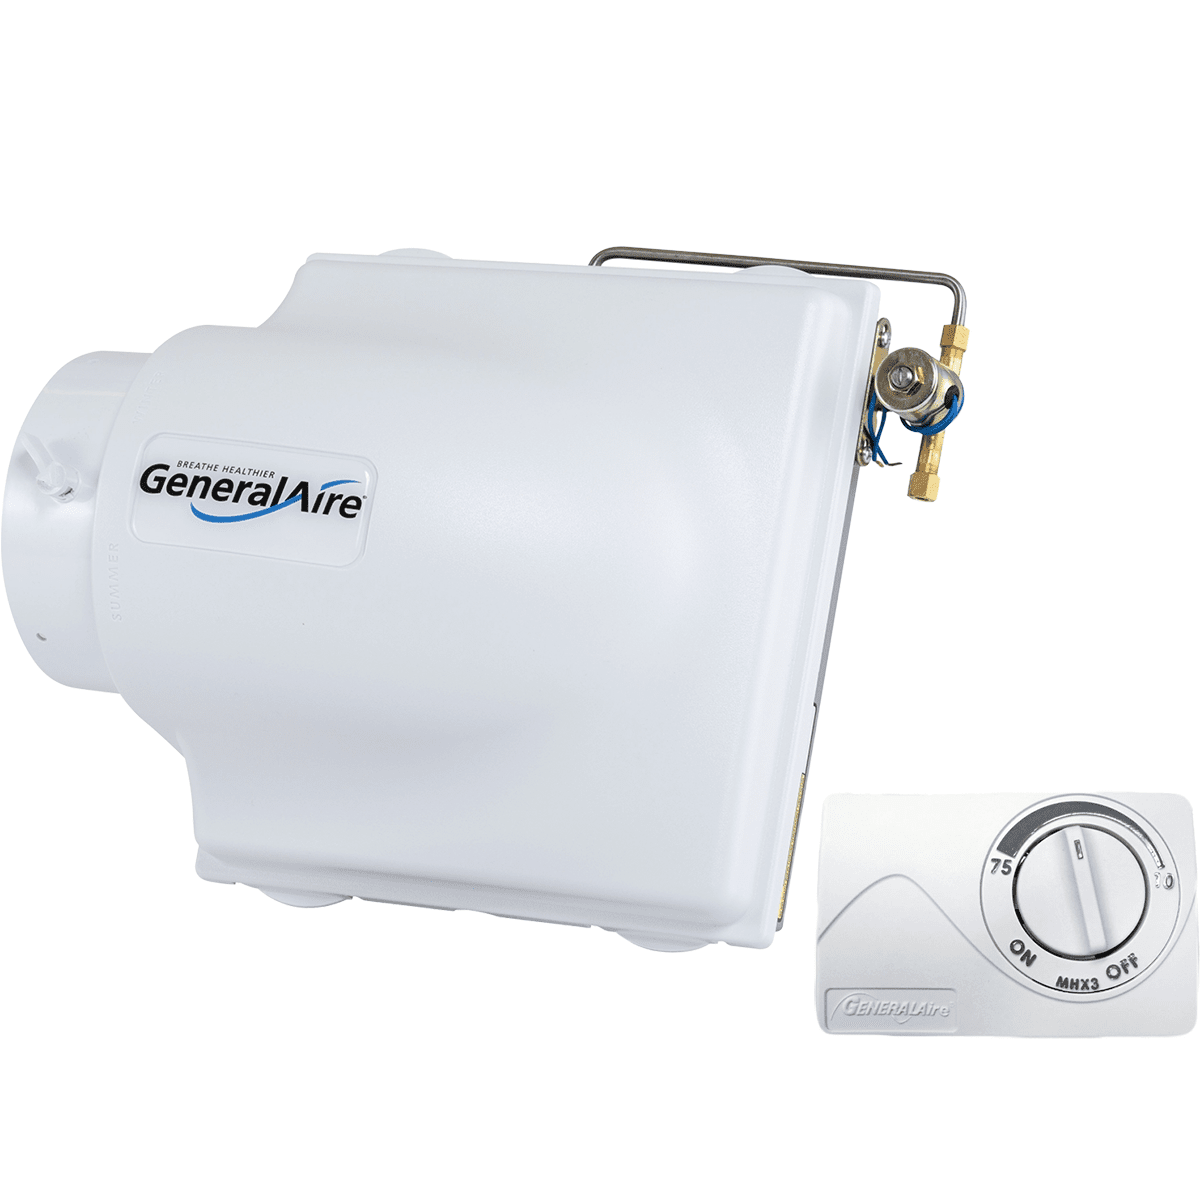 General Aire Model 3200M Bypass Evaporative Humidifier For Up To 3,200 Sq. Ft. - Manual Control